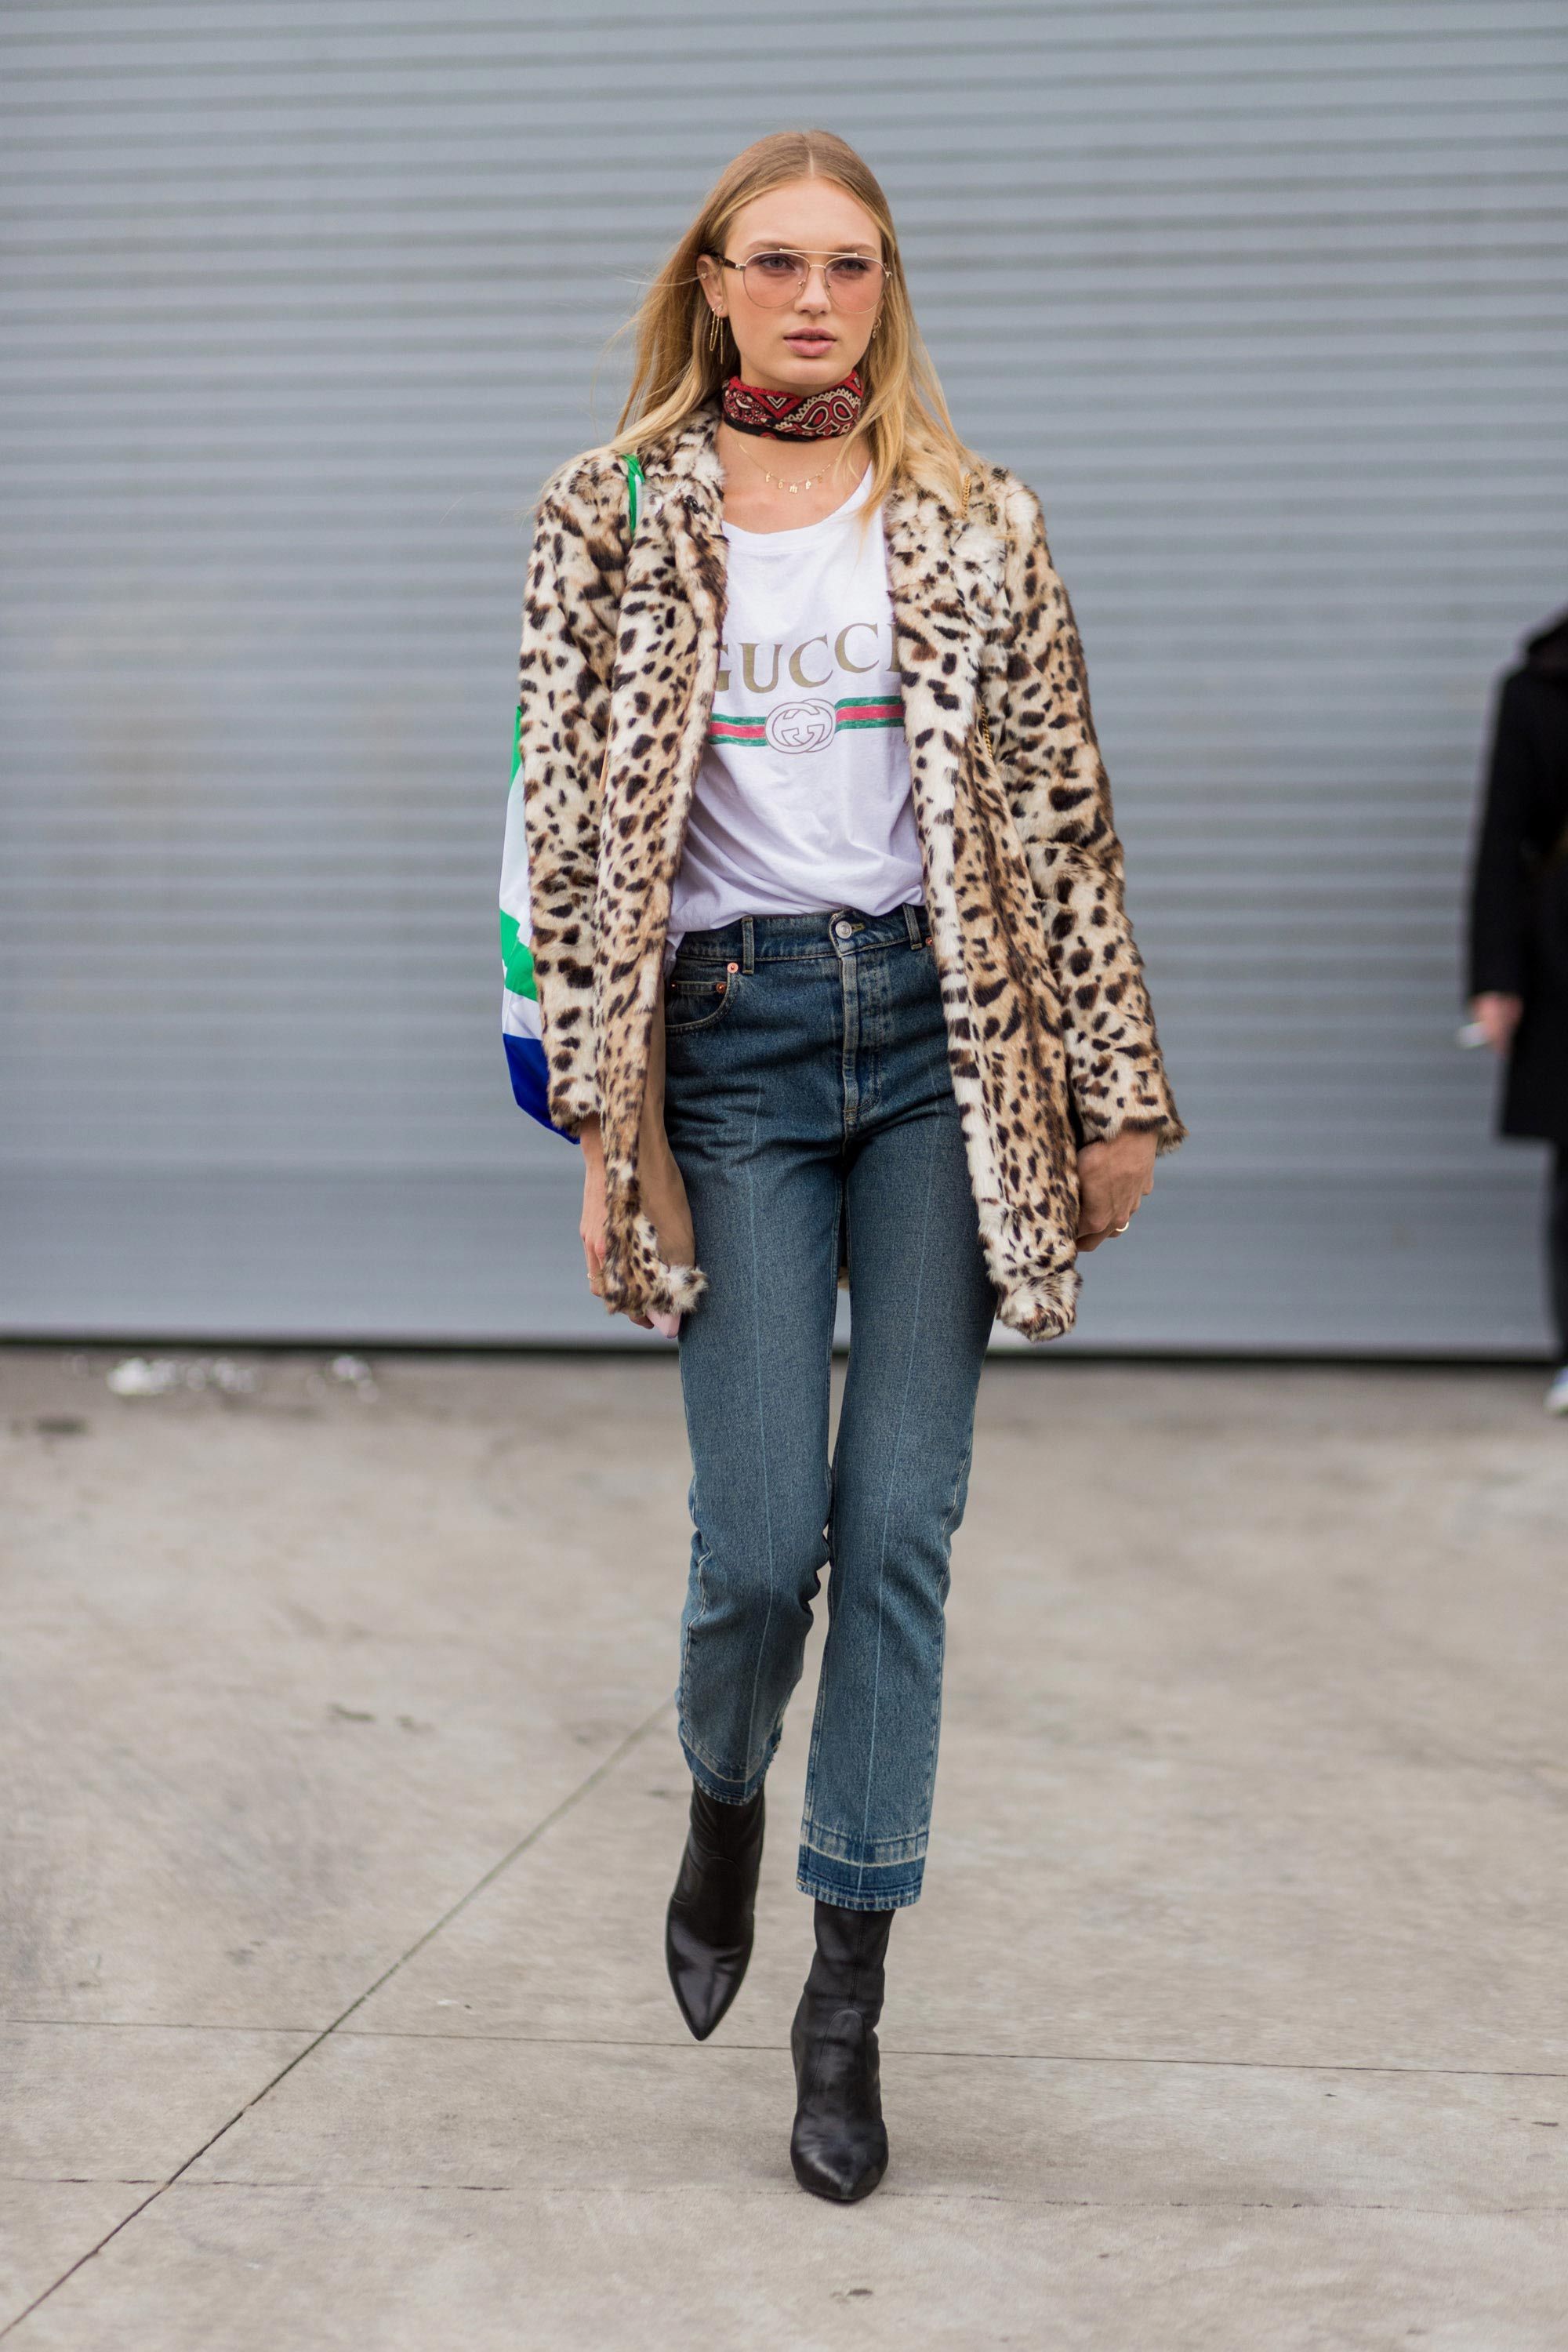 The Brits Love Their Leopard Print! There are 6 Cool Ways to Wear